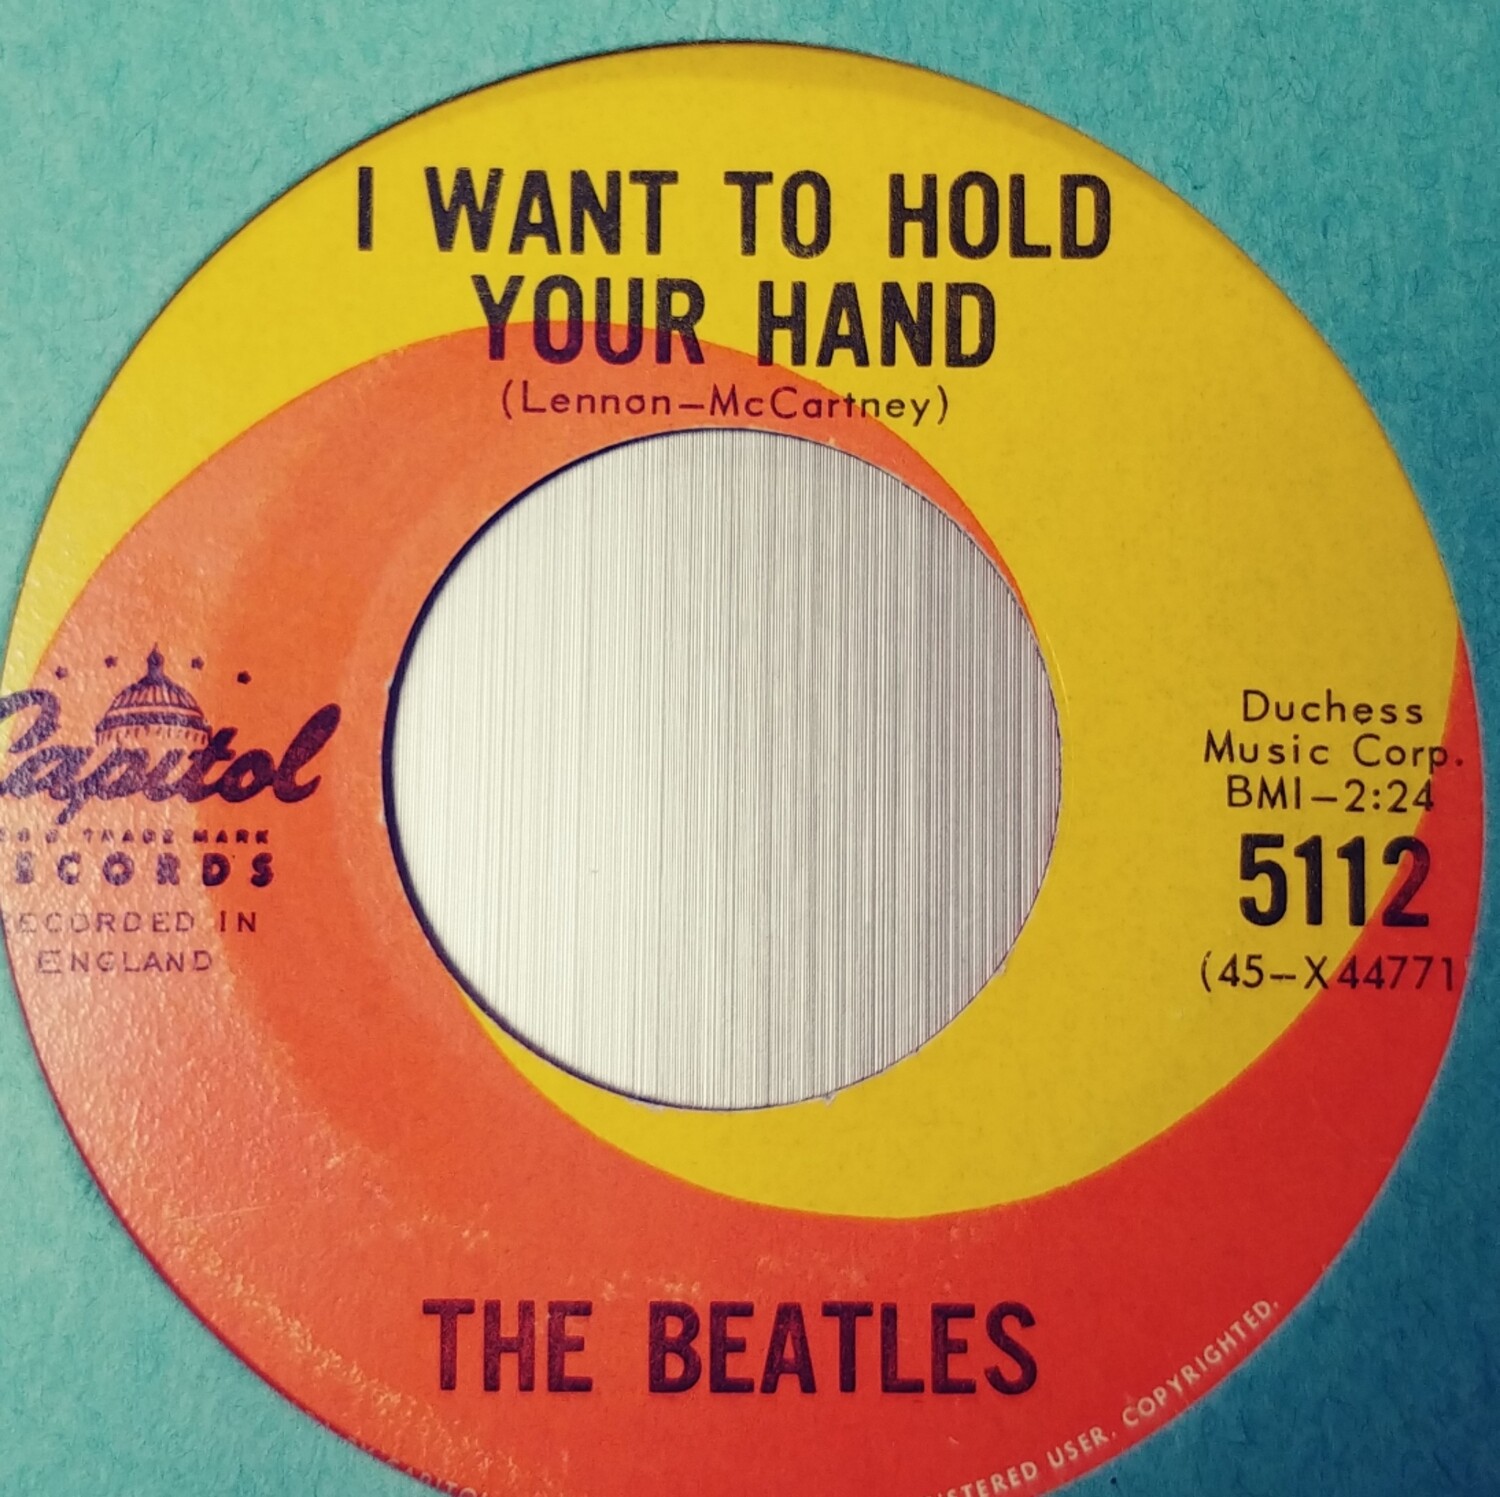 The Beatles - I want to hold your hand / I saw her standing there